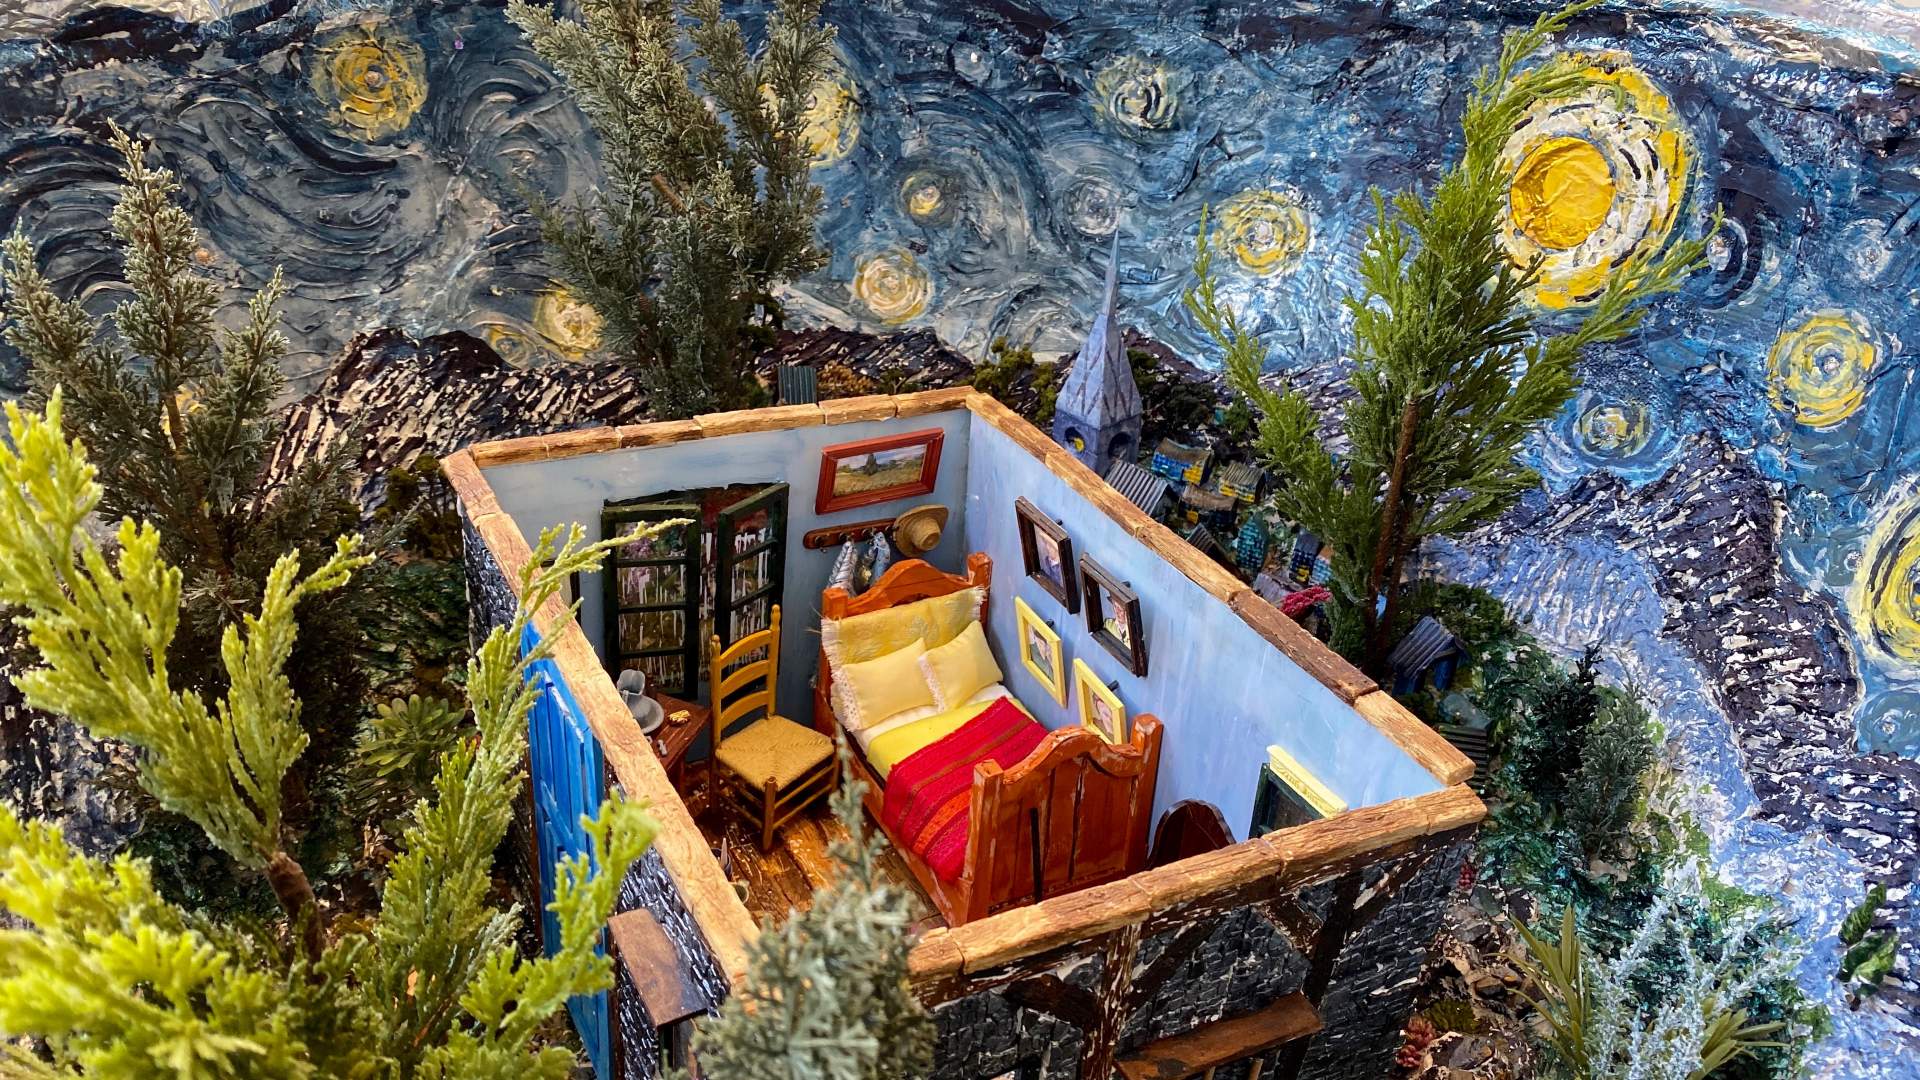 The Starry Night Geode | Interior view